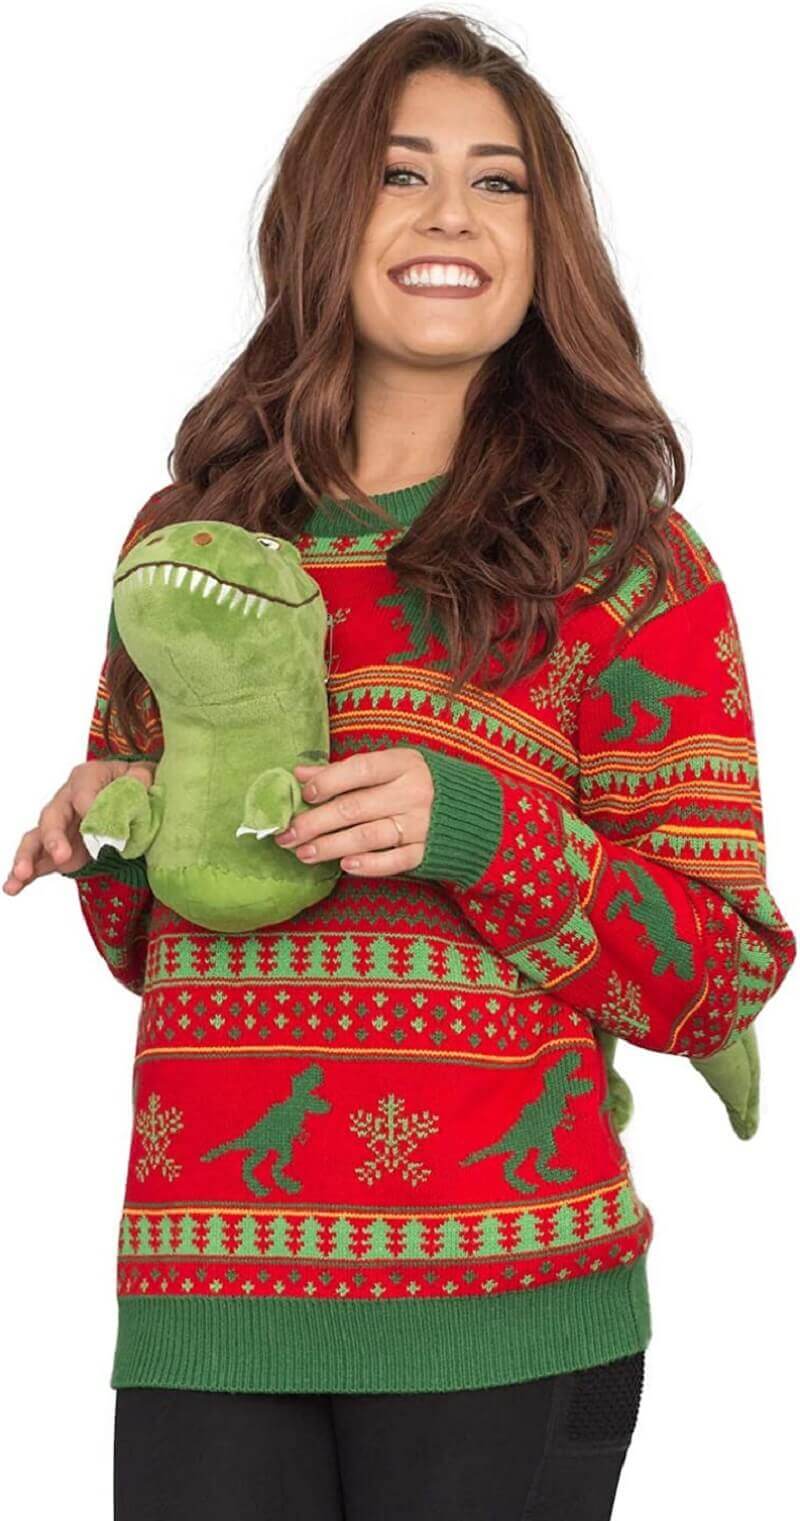 T-Rex Ugly Christmas Sweater is Sure to Draw Jurassic Attention